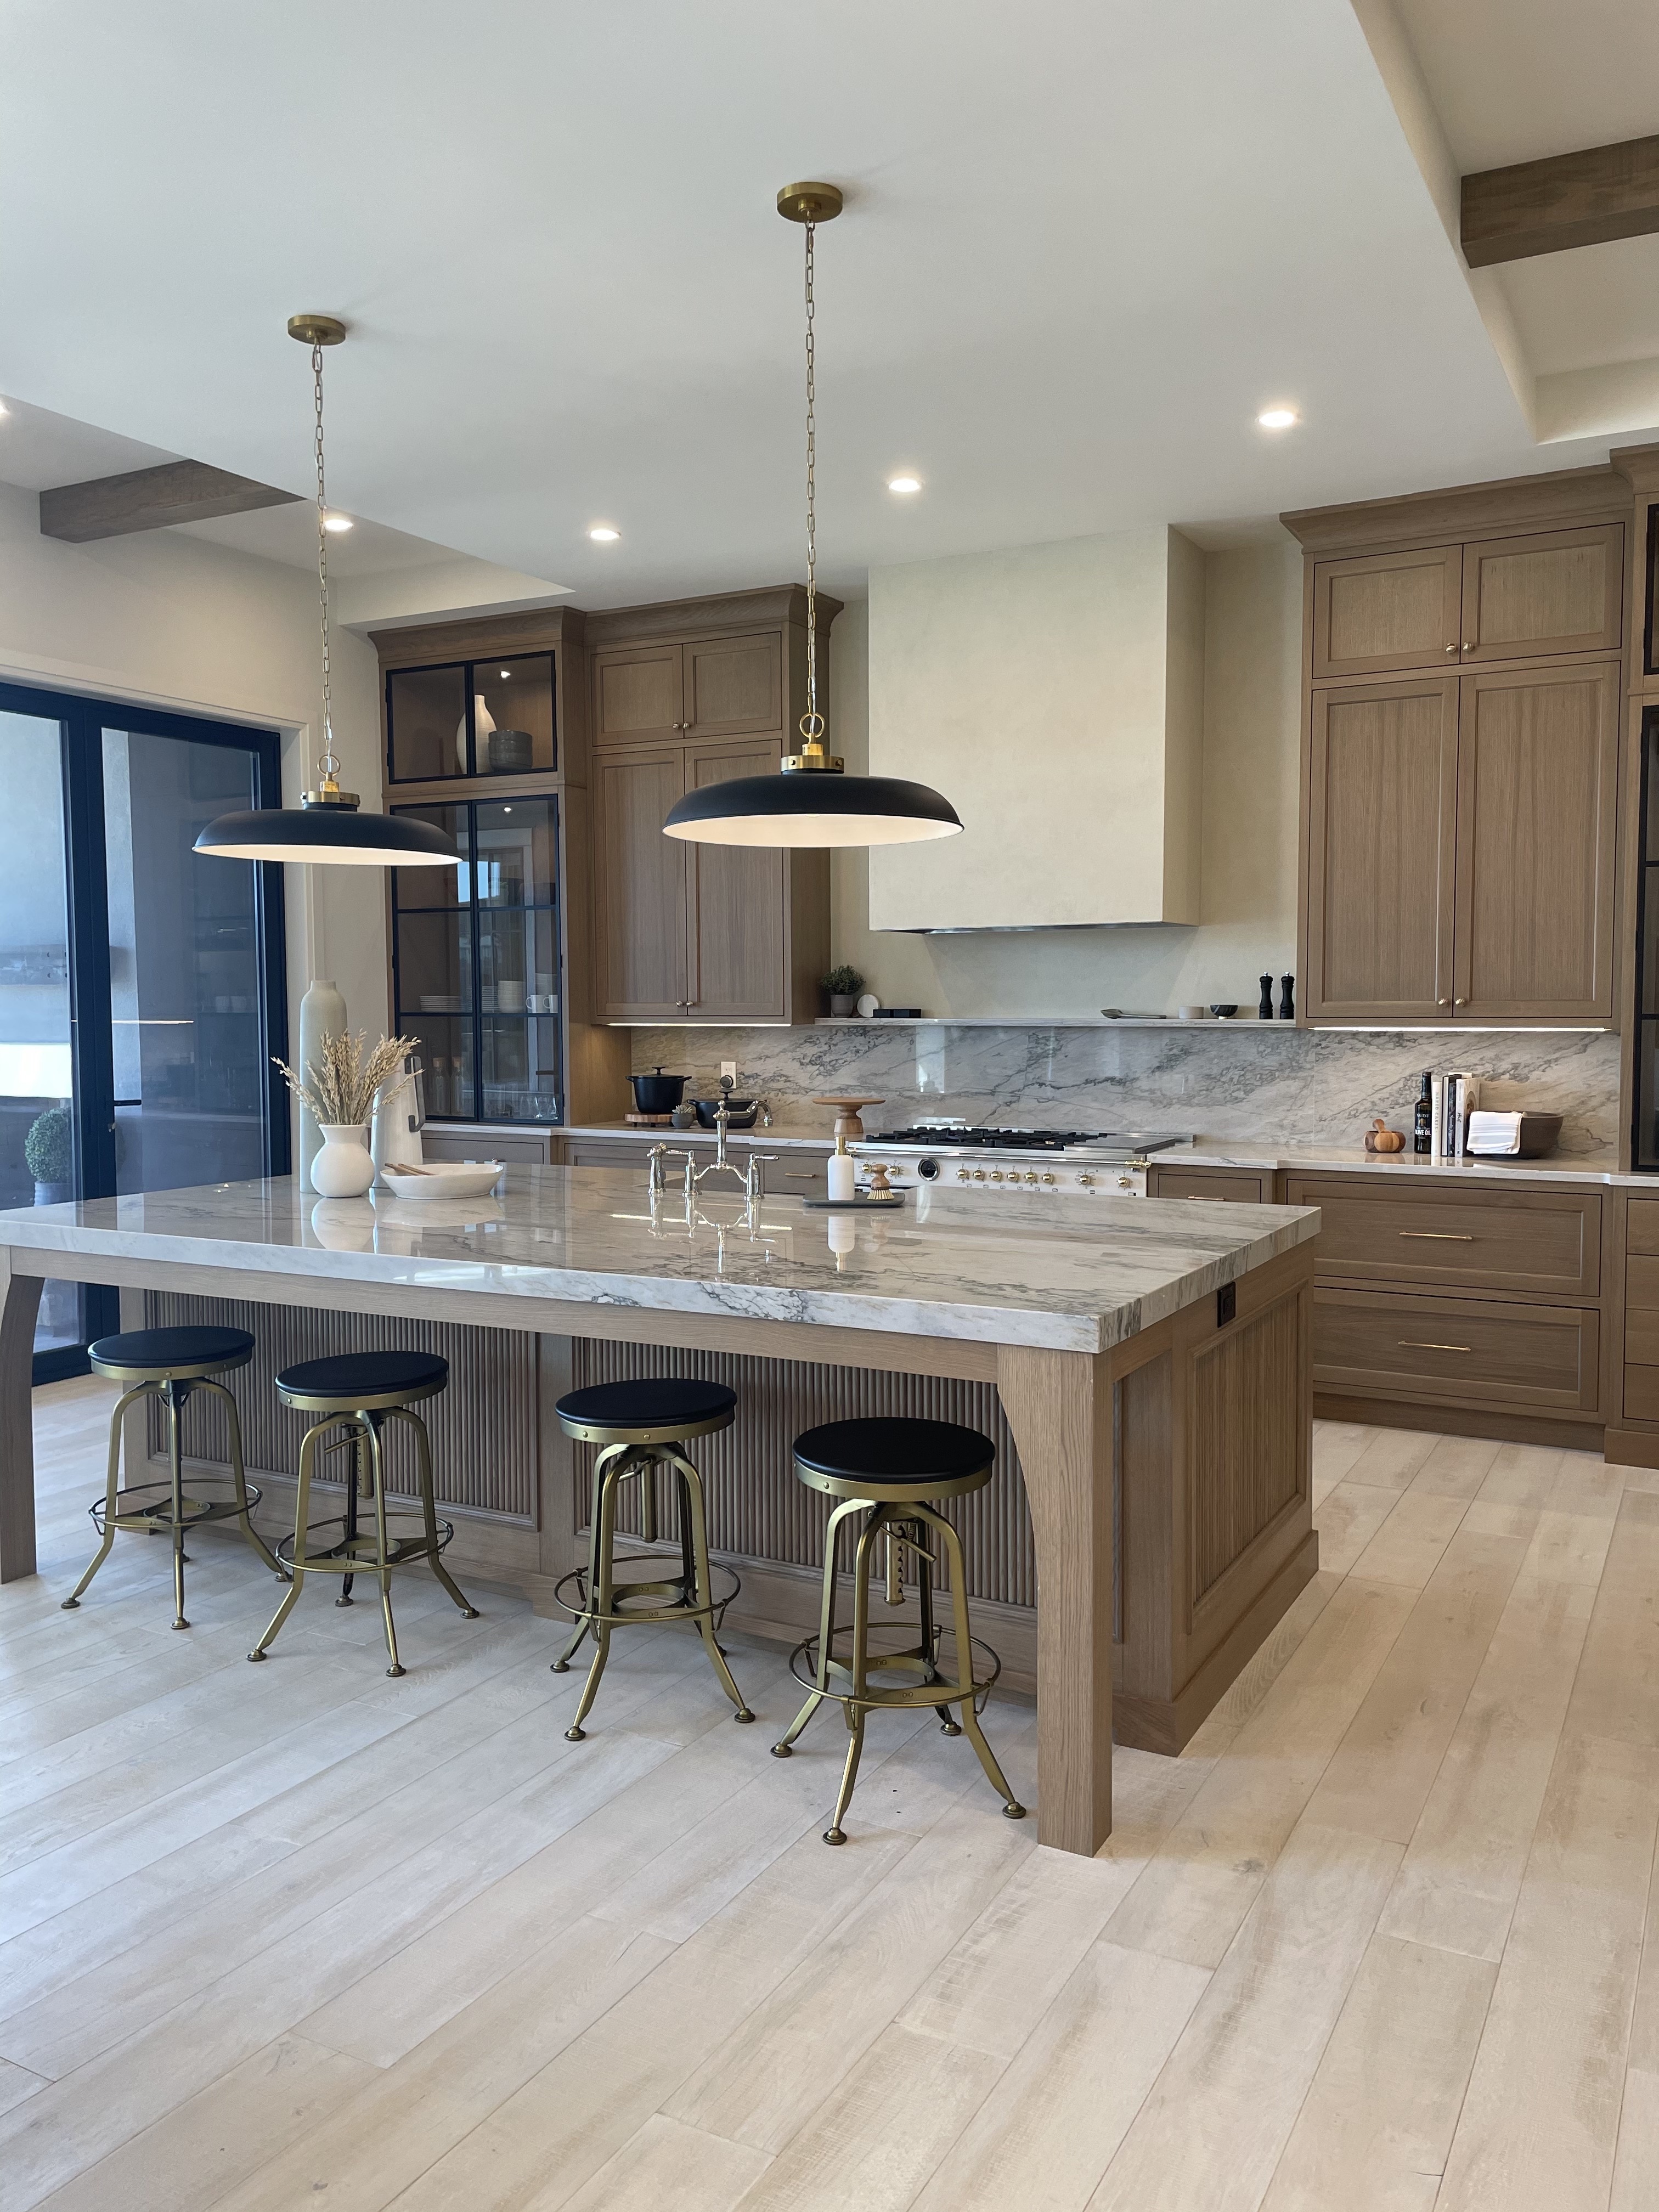 A kitchen interior with modern finishings